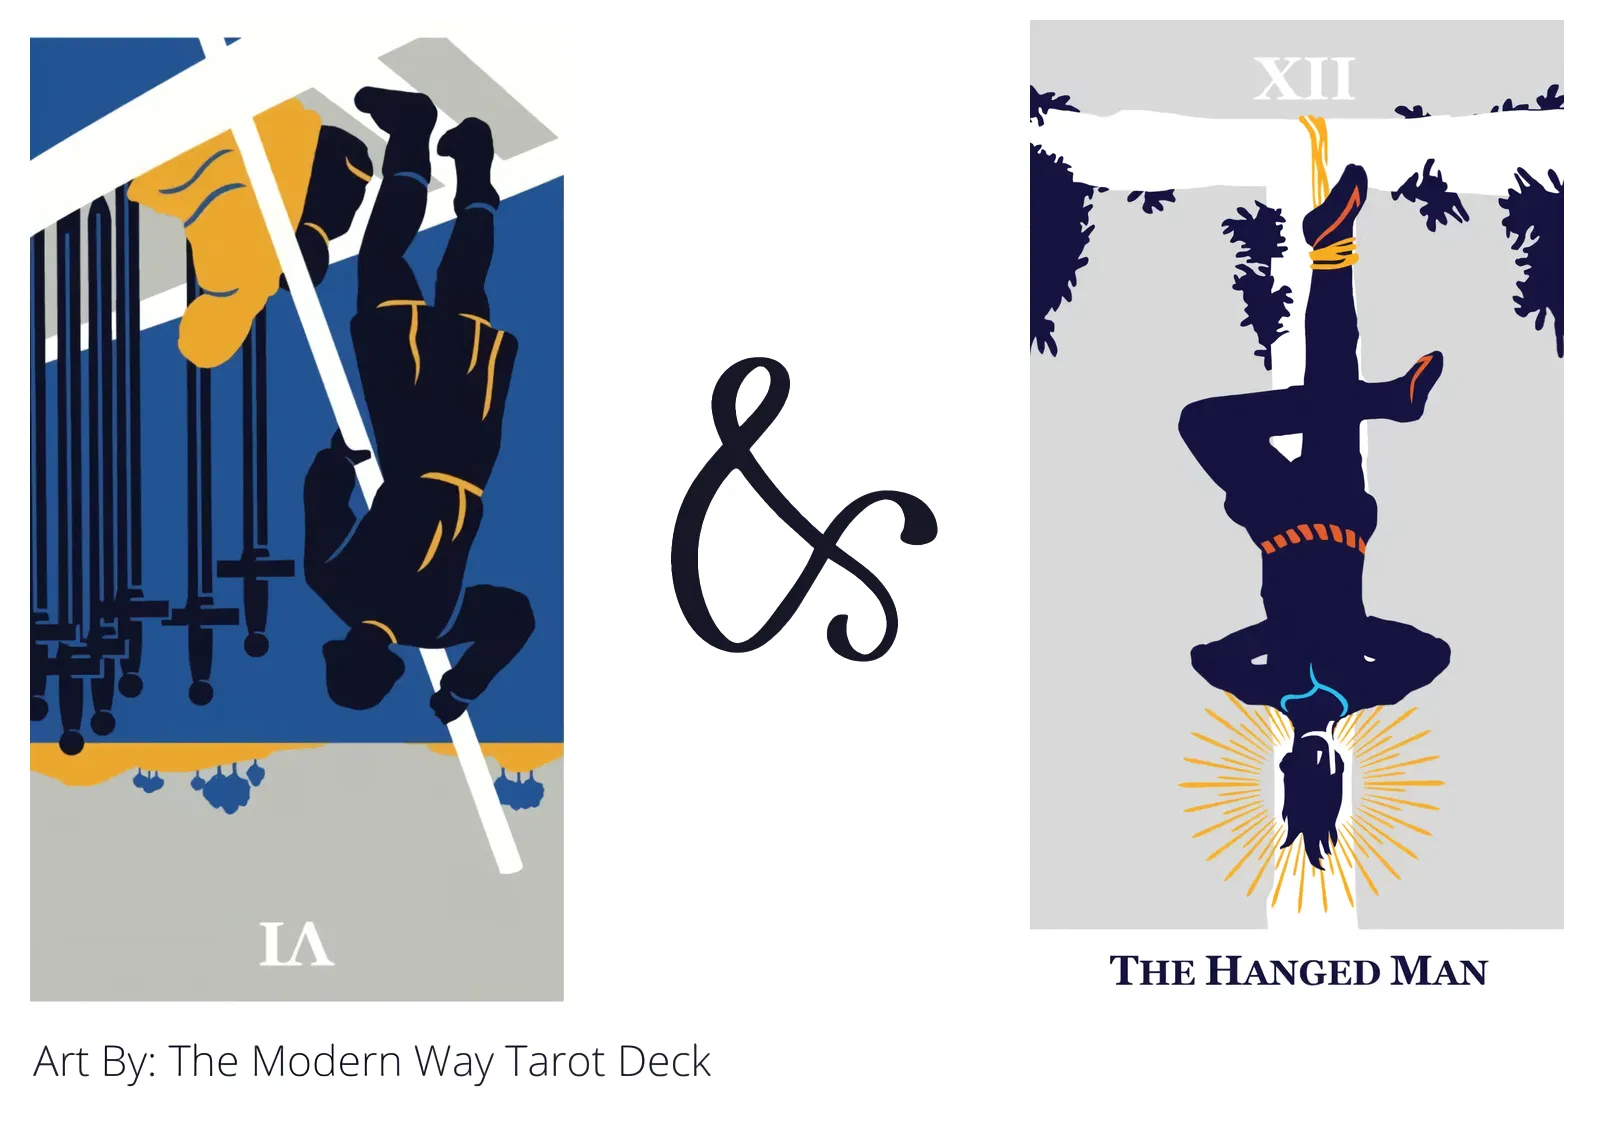 six of swords reversed and the hanged man tarot cards together